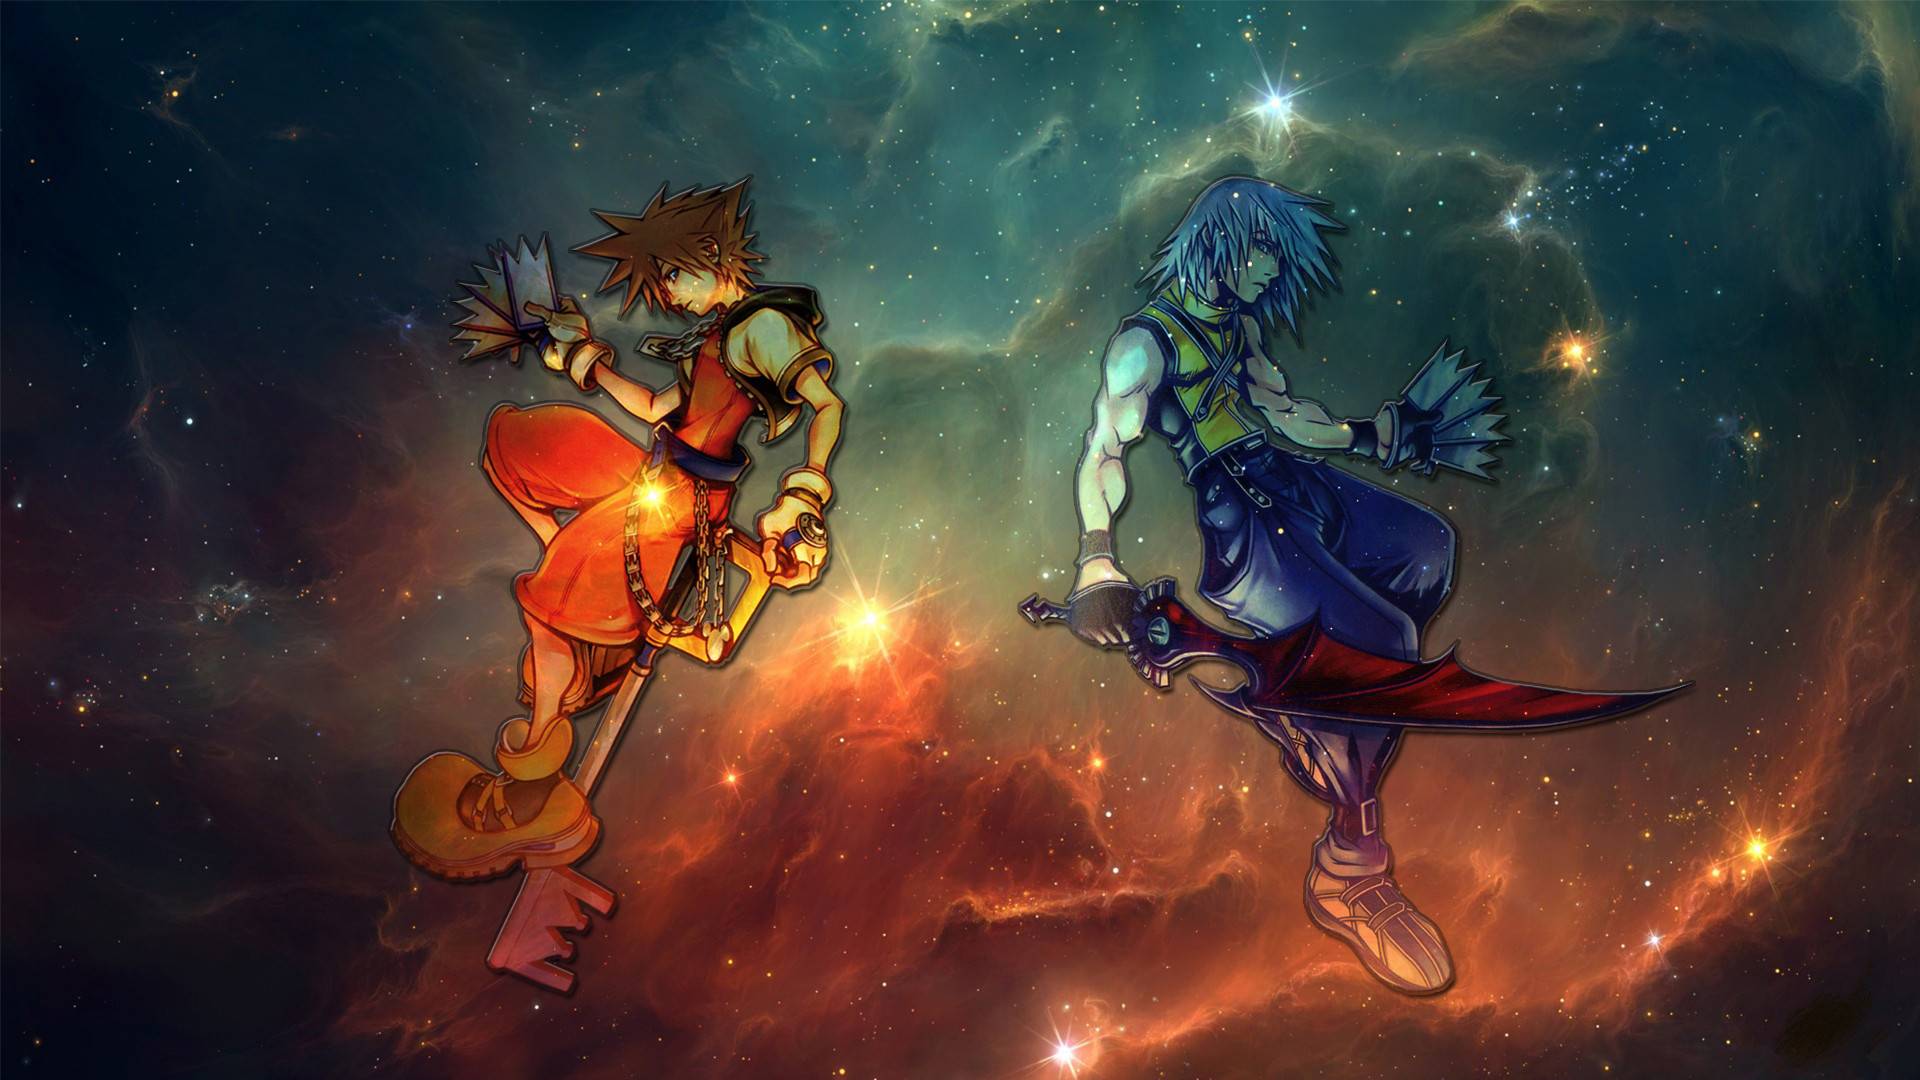 Kingdom Hearts Wallpaper Download For Free For Desktop - Kingdom Hearts Background 1080 - HD Wallpaper 